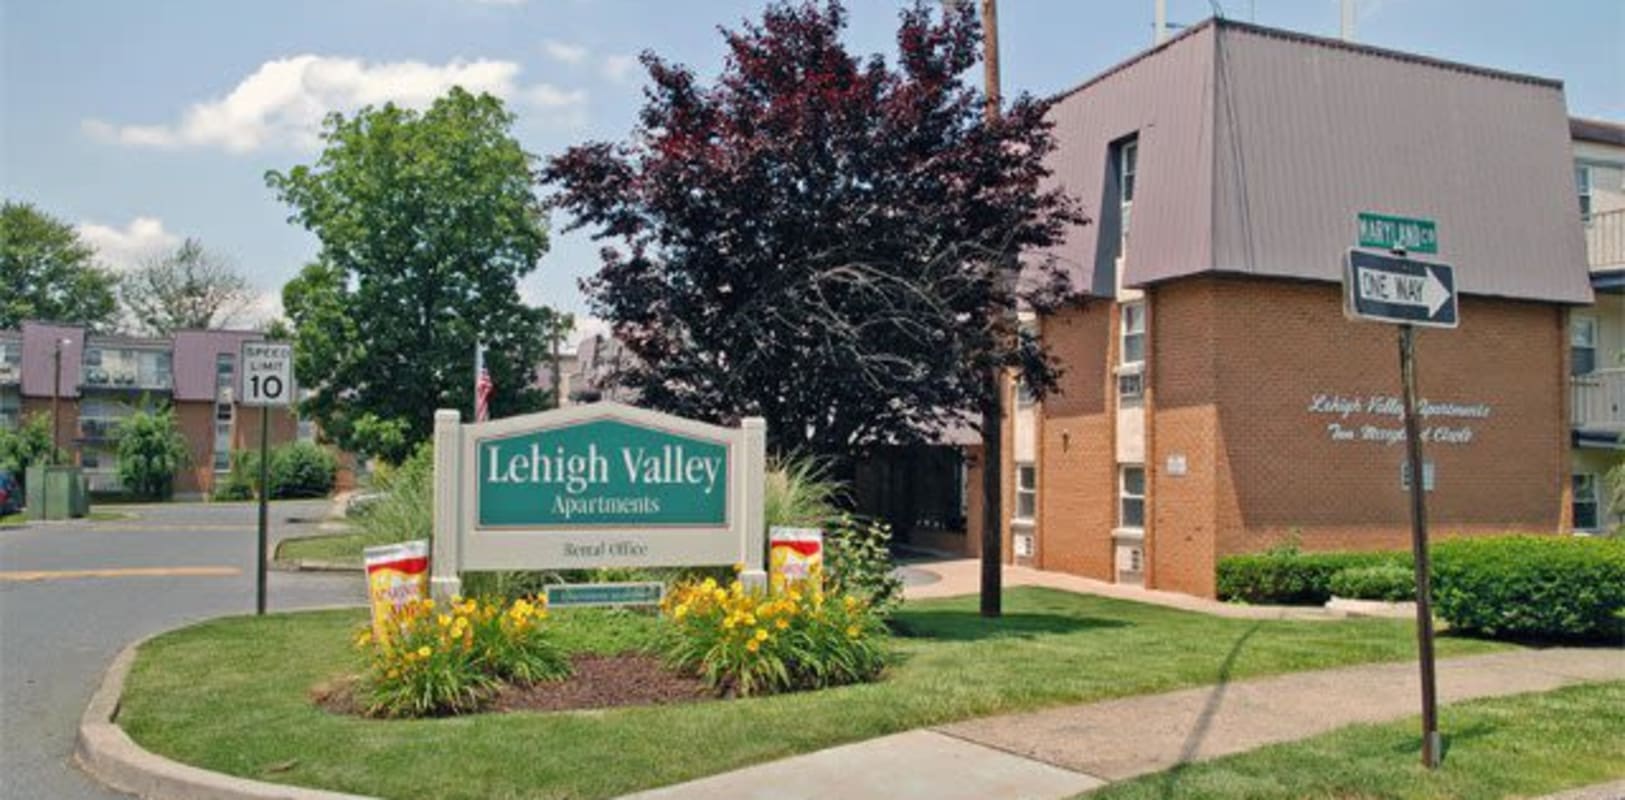 Apartment welcoming sign at Lehigh Valley in Whitehall, Pennsylvania